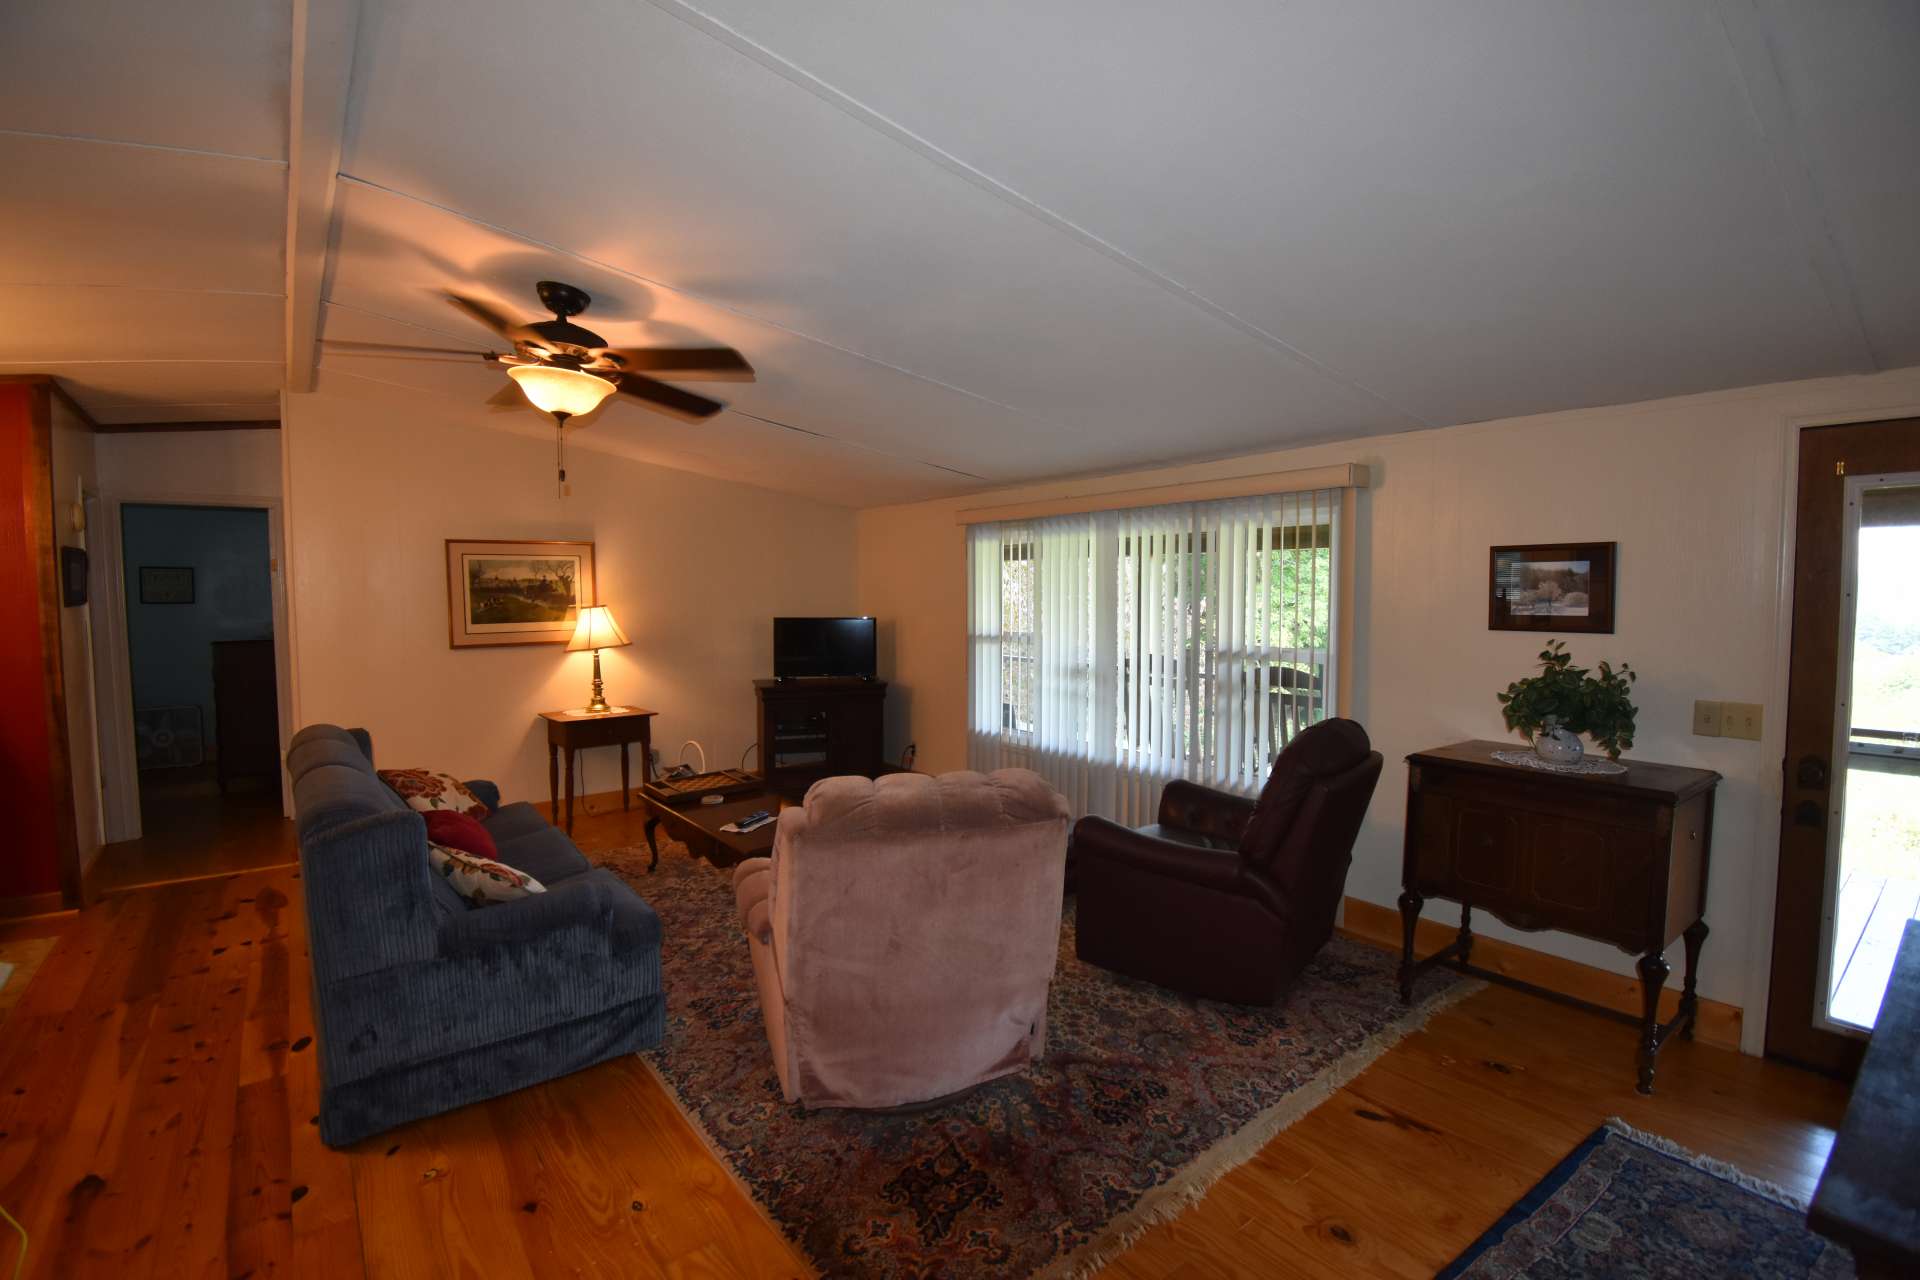 The light filled living area offers wood floors and is open to the kitchen and dining areas.